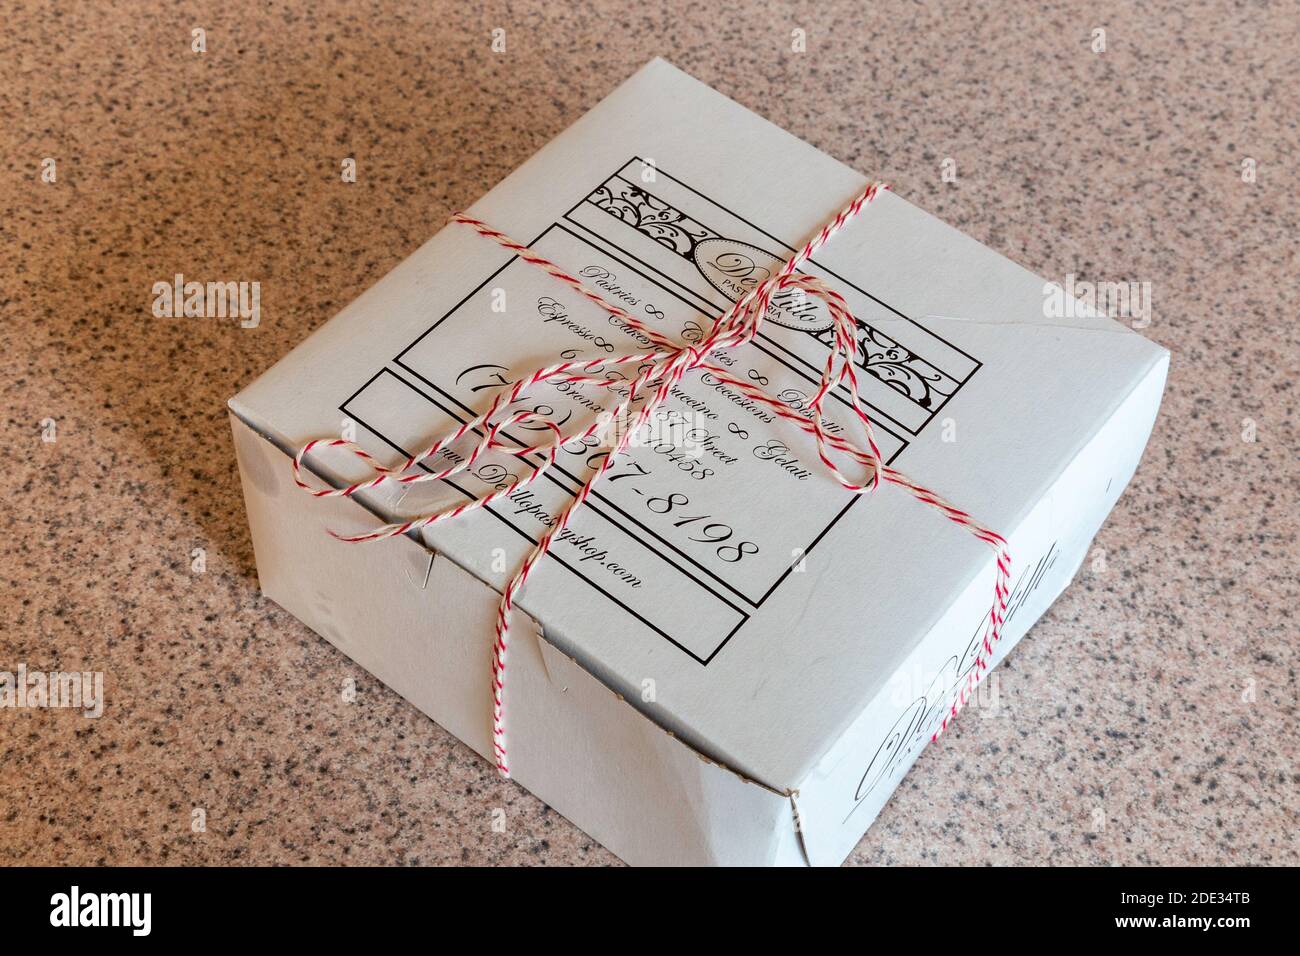 De Lillo Pasticceria cardboard pastry box tied with red and white twine, Bronx, New York, USA Stock Photo